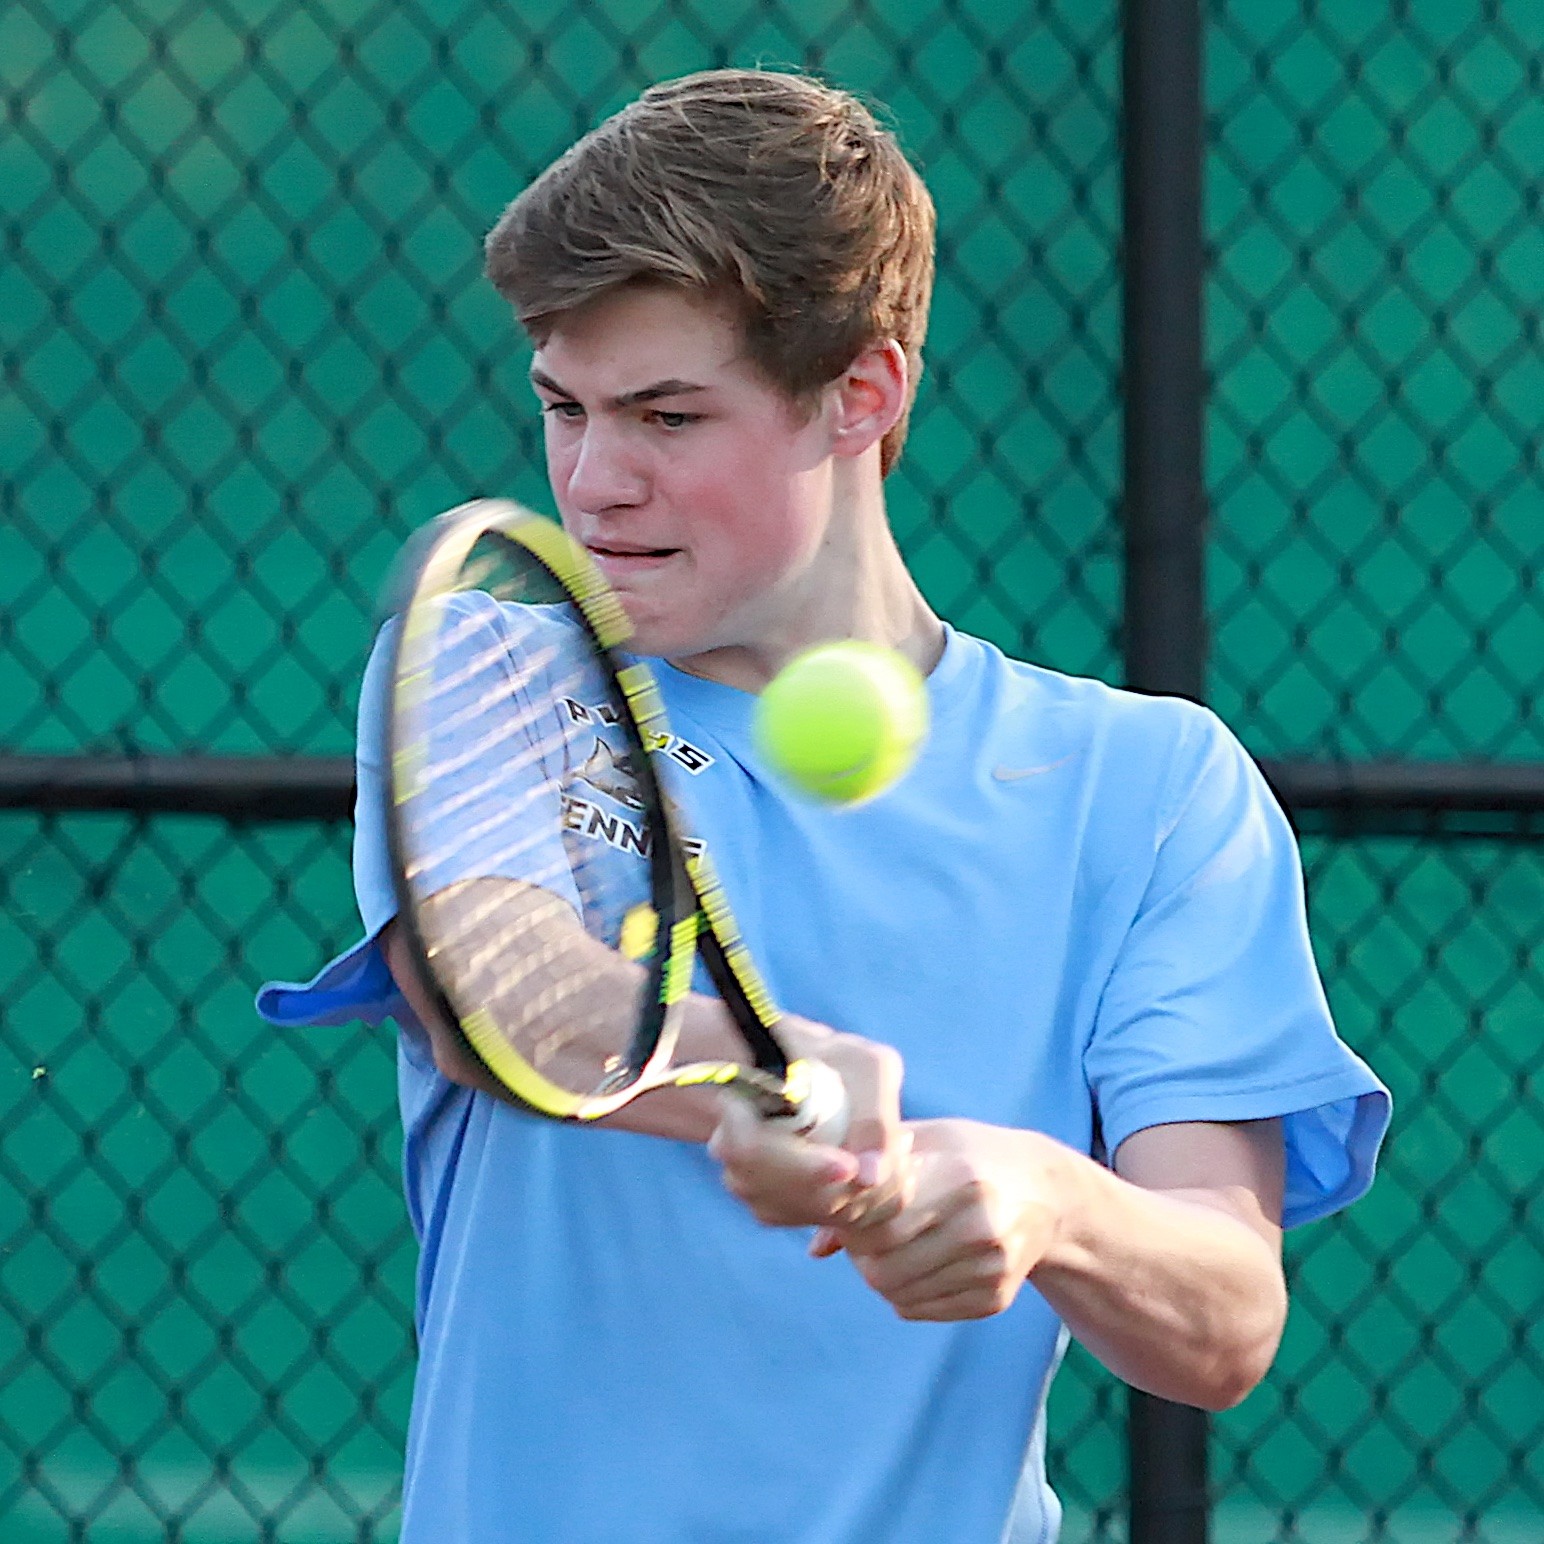 Davis Massey of the Sharks concentrates as he hits a backhand against Bertram.